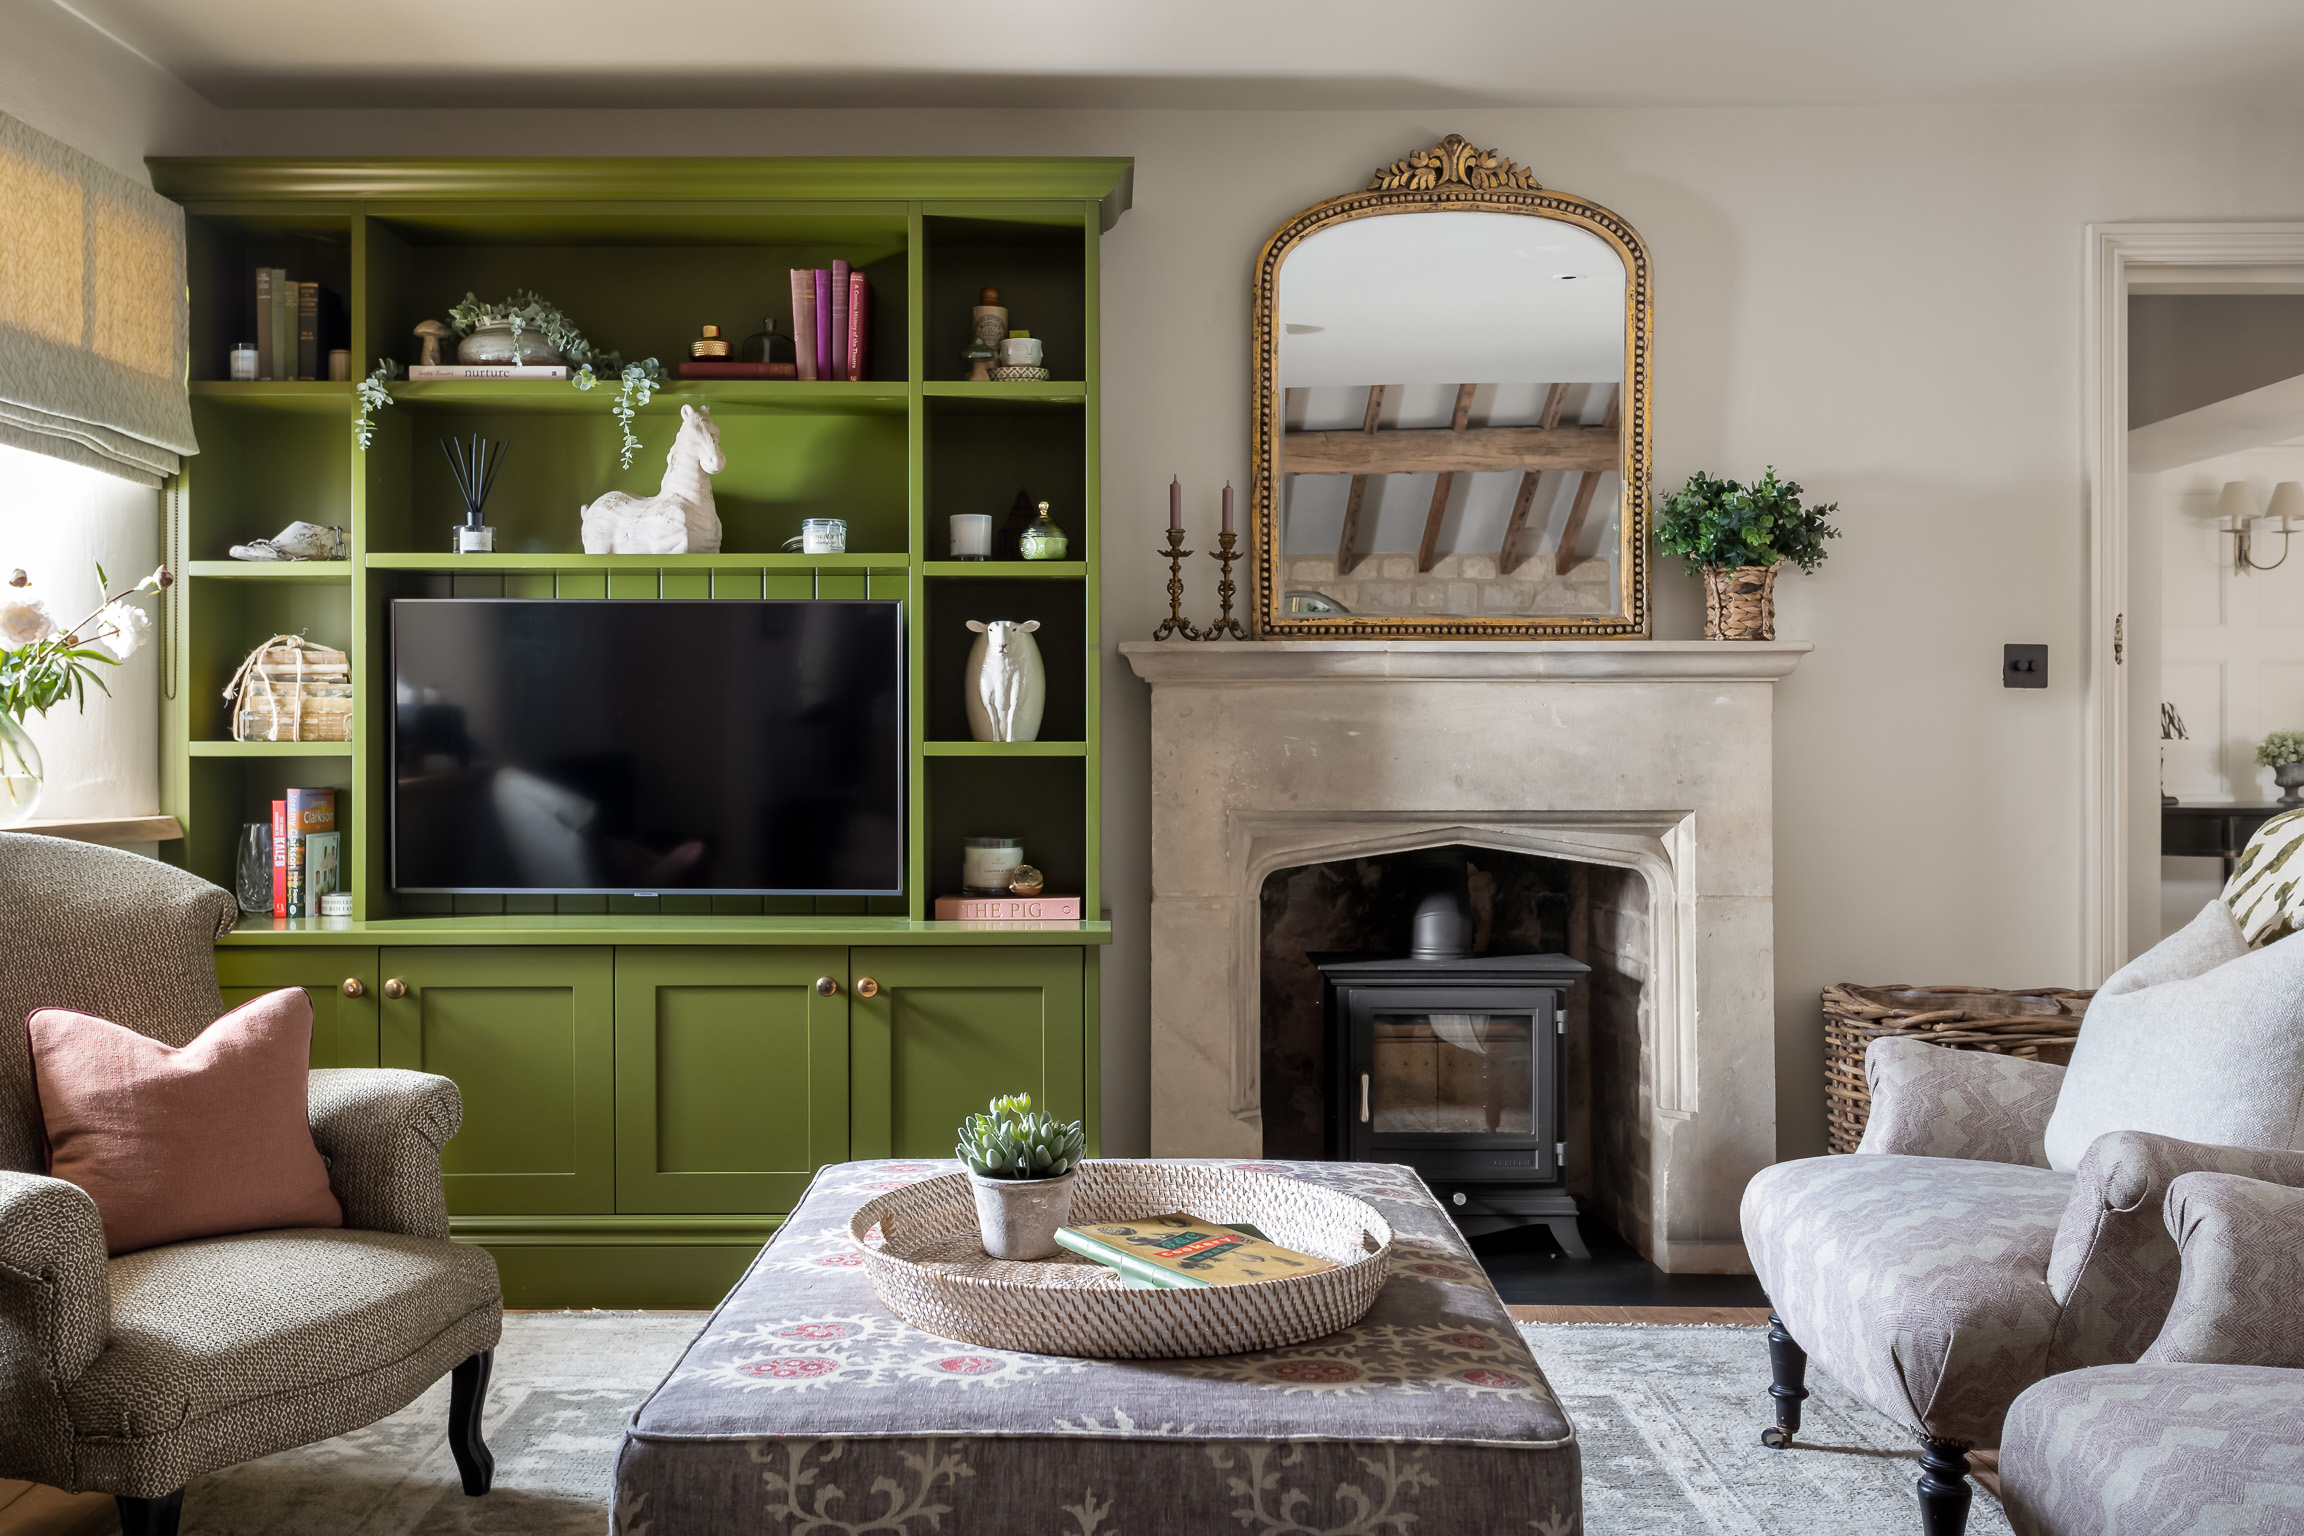 Livign room with green bookcase, large footstool, sofa, fireplace & overmantel mirror and 3 armchairs